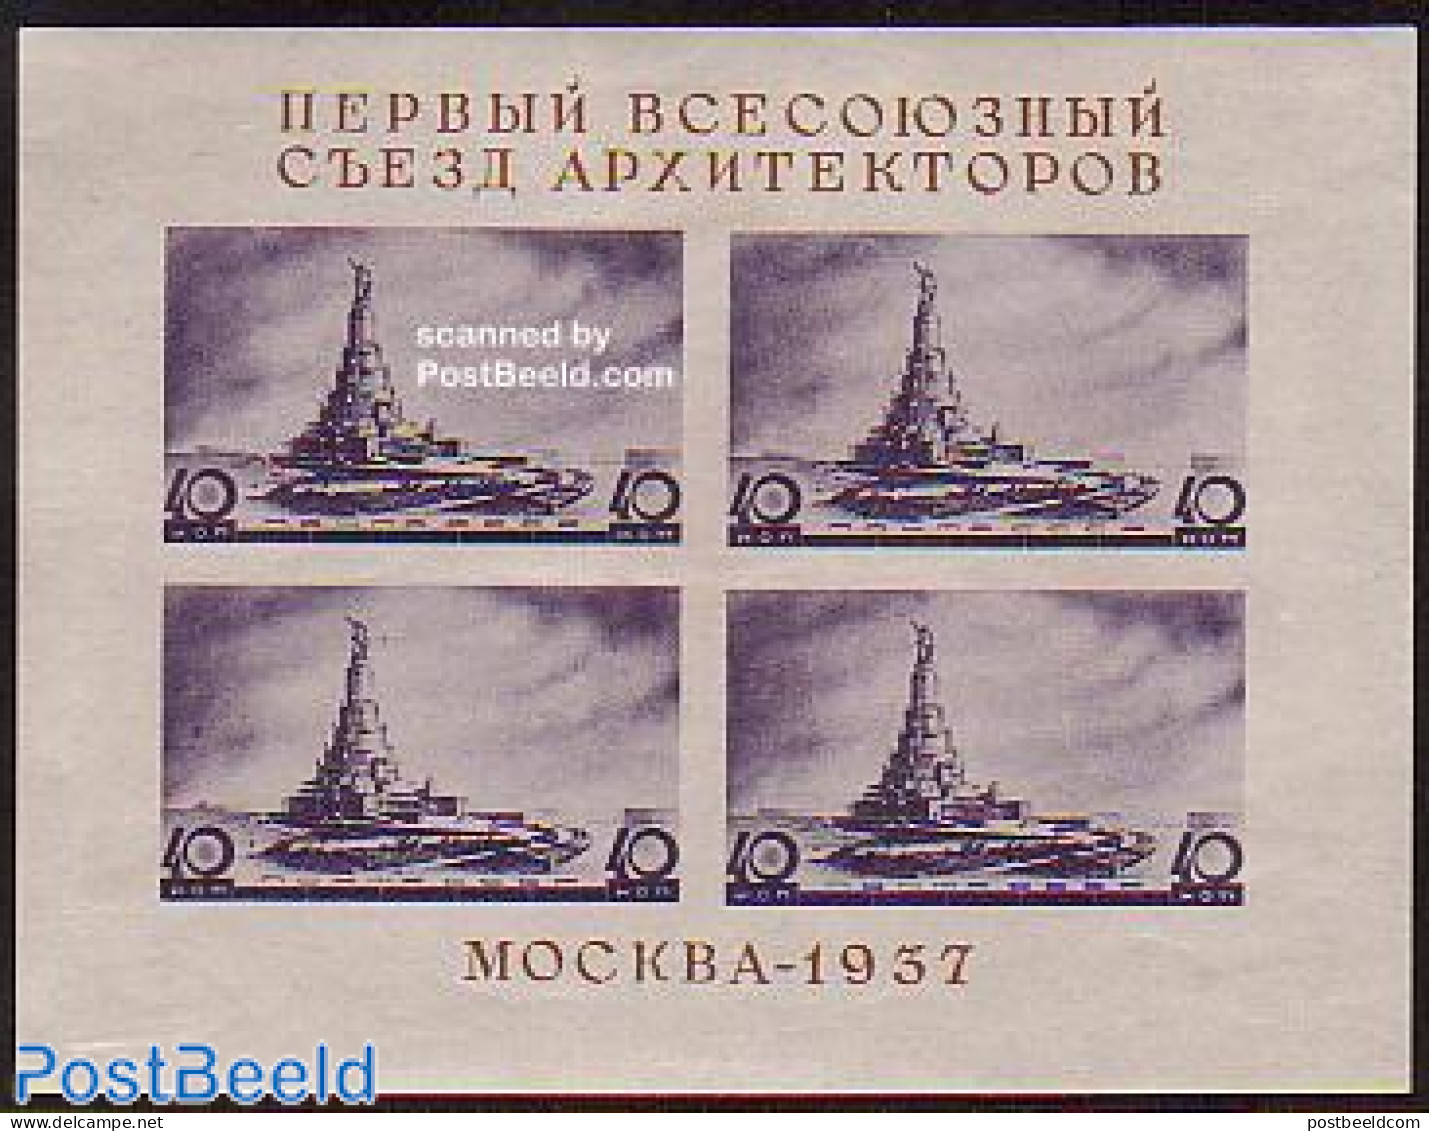 Russia, Soviet Union 1937 Architect Congress S/s, Mint NH, Art - Architects - Unused Stamps